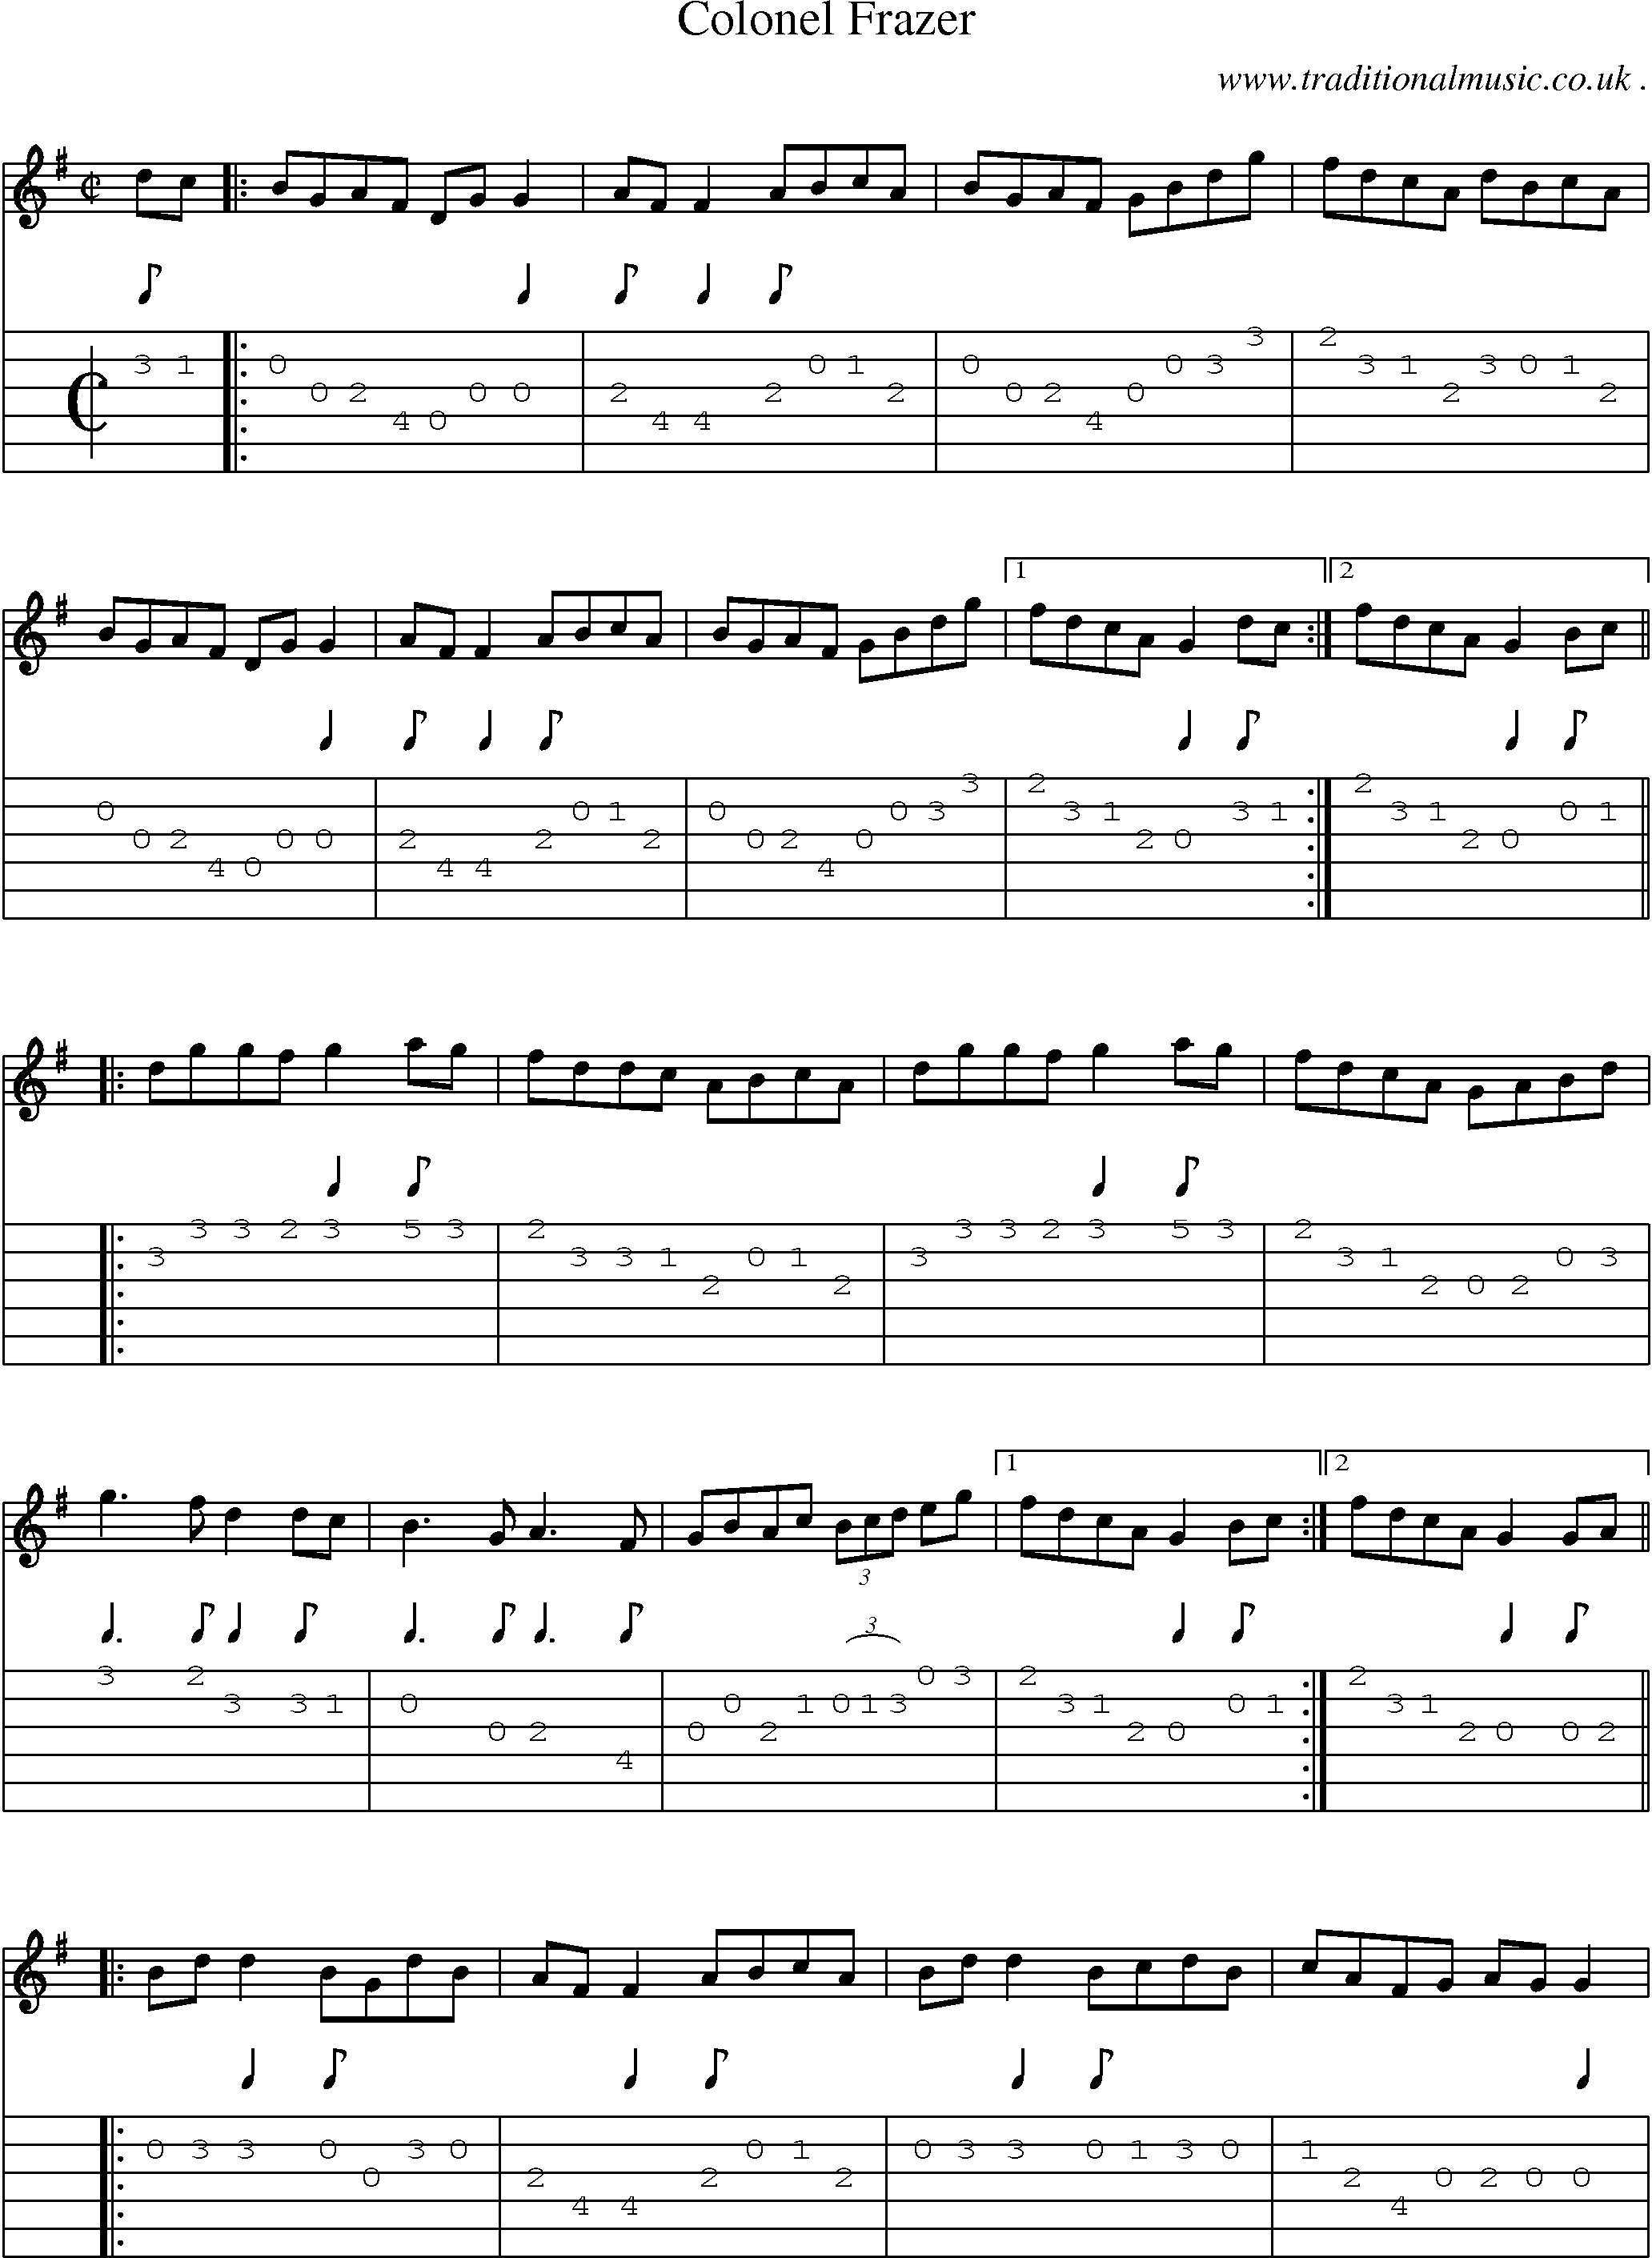 Sheet-Music and Guitar Tabs for Colonel Frazer